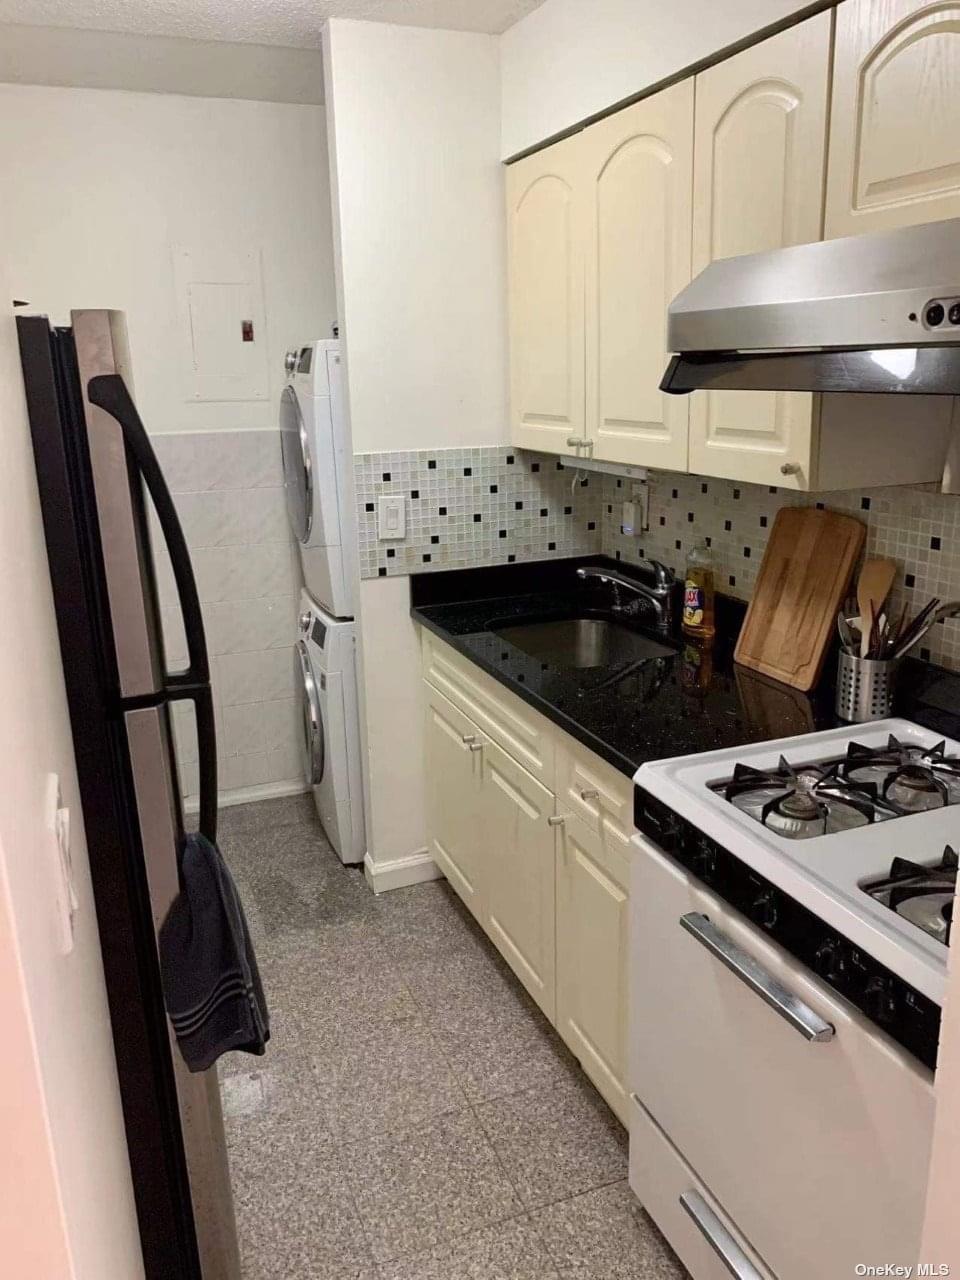 42-42 Union Street #4F in Queens, Flushing, NY 11355